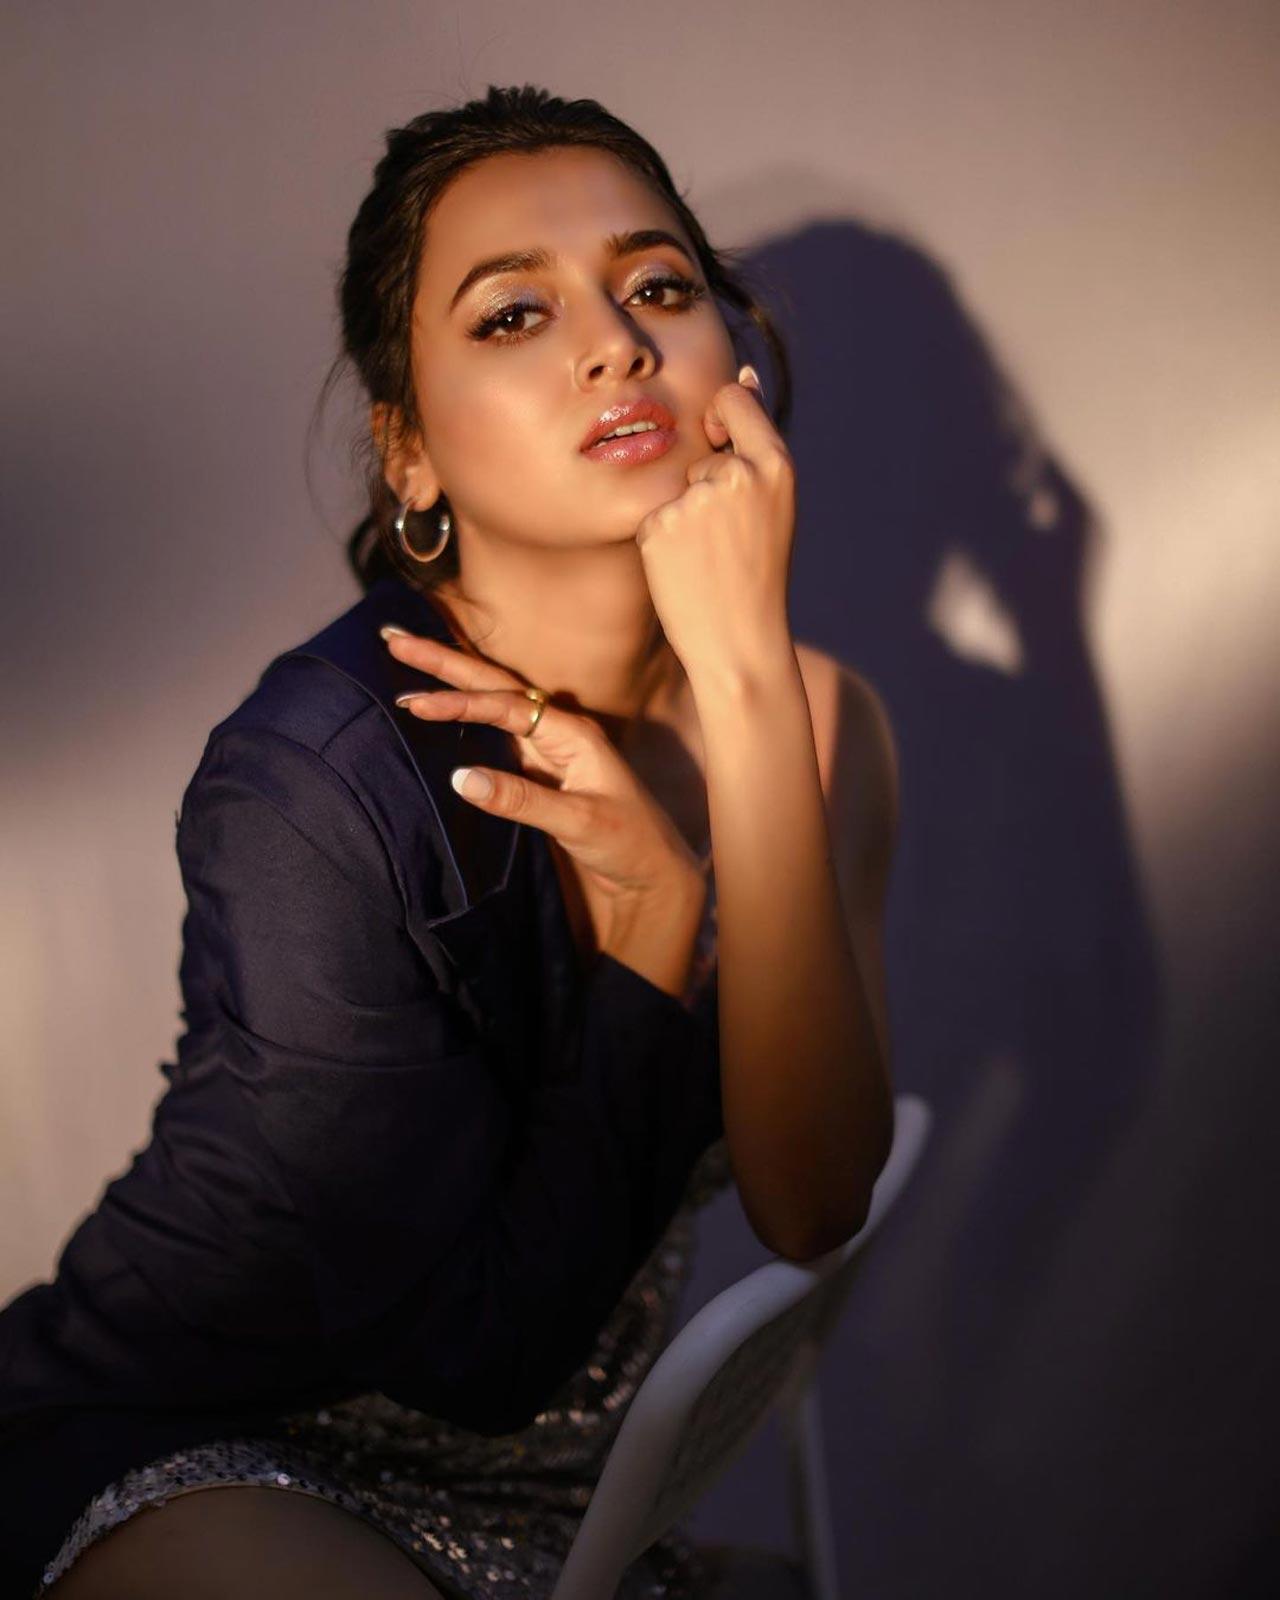 Meanwhile, on the work front, Tejasswi is presently playing the lead in Ekta Kapoor's popular fictional show Naagin 6, along with Bigg Boss fame Simba Nagpal